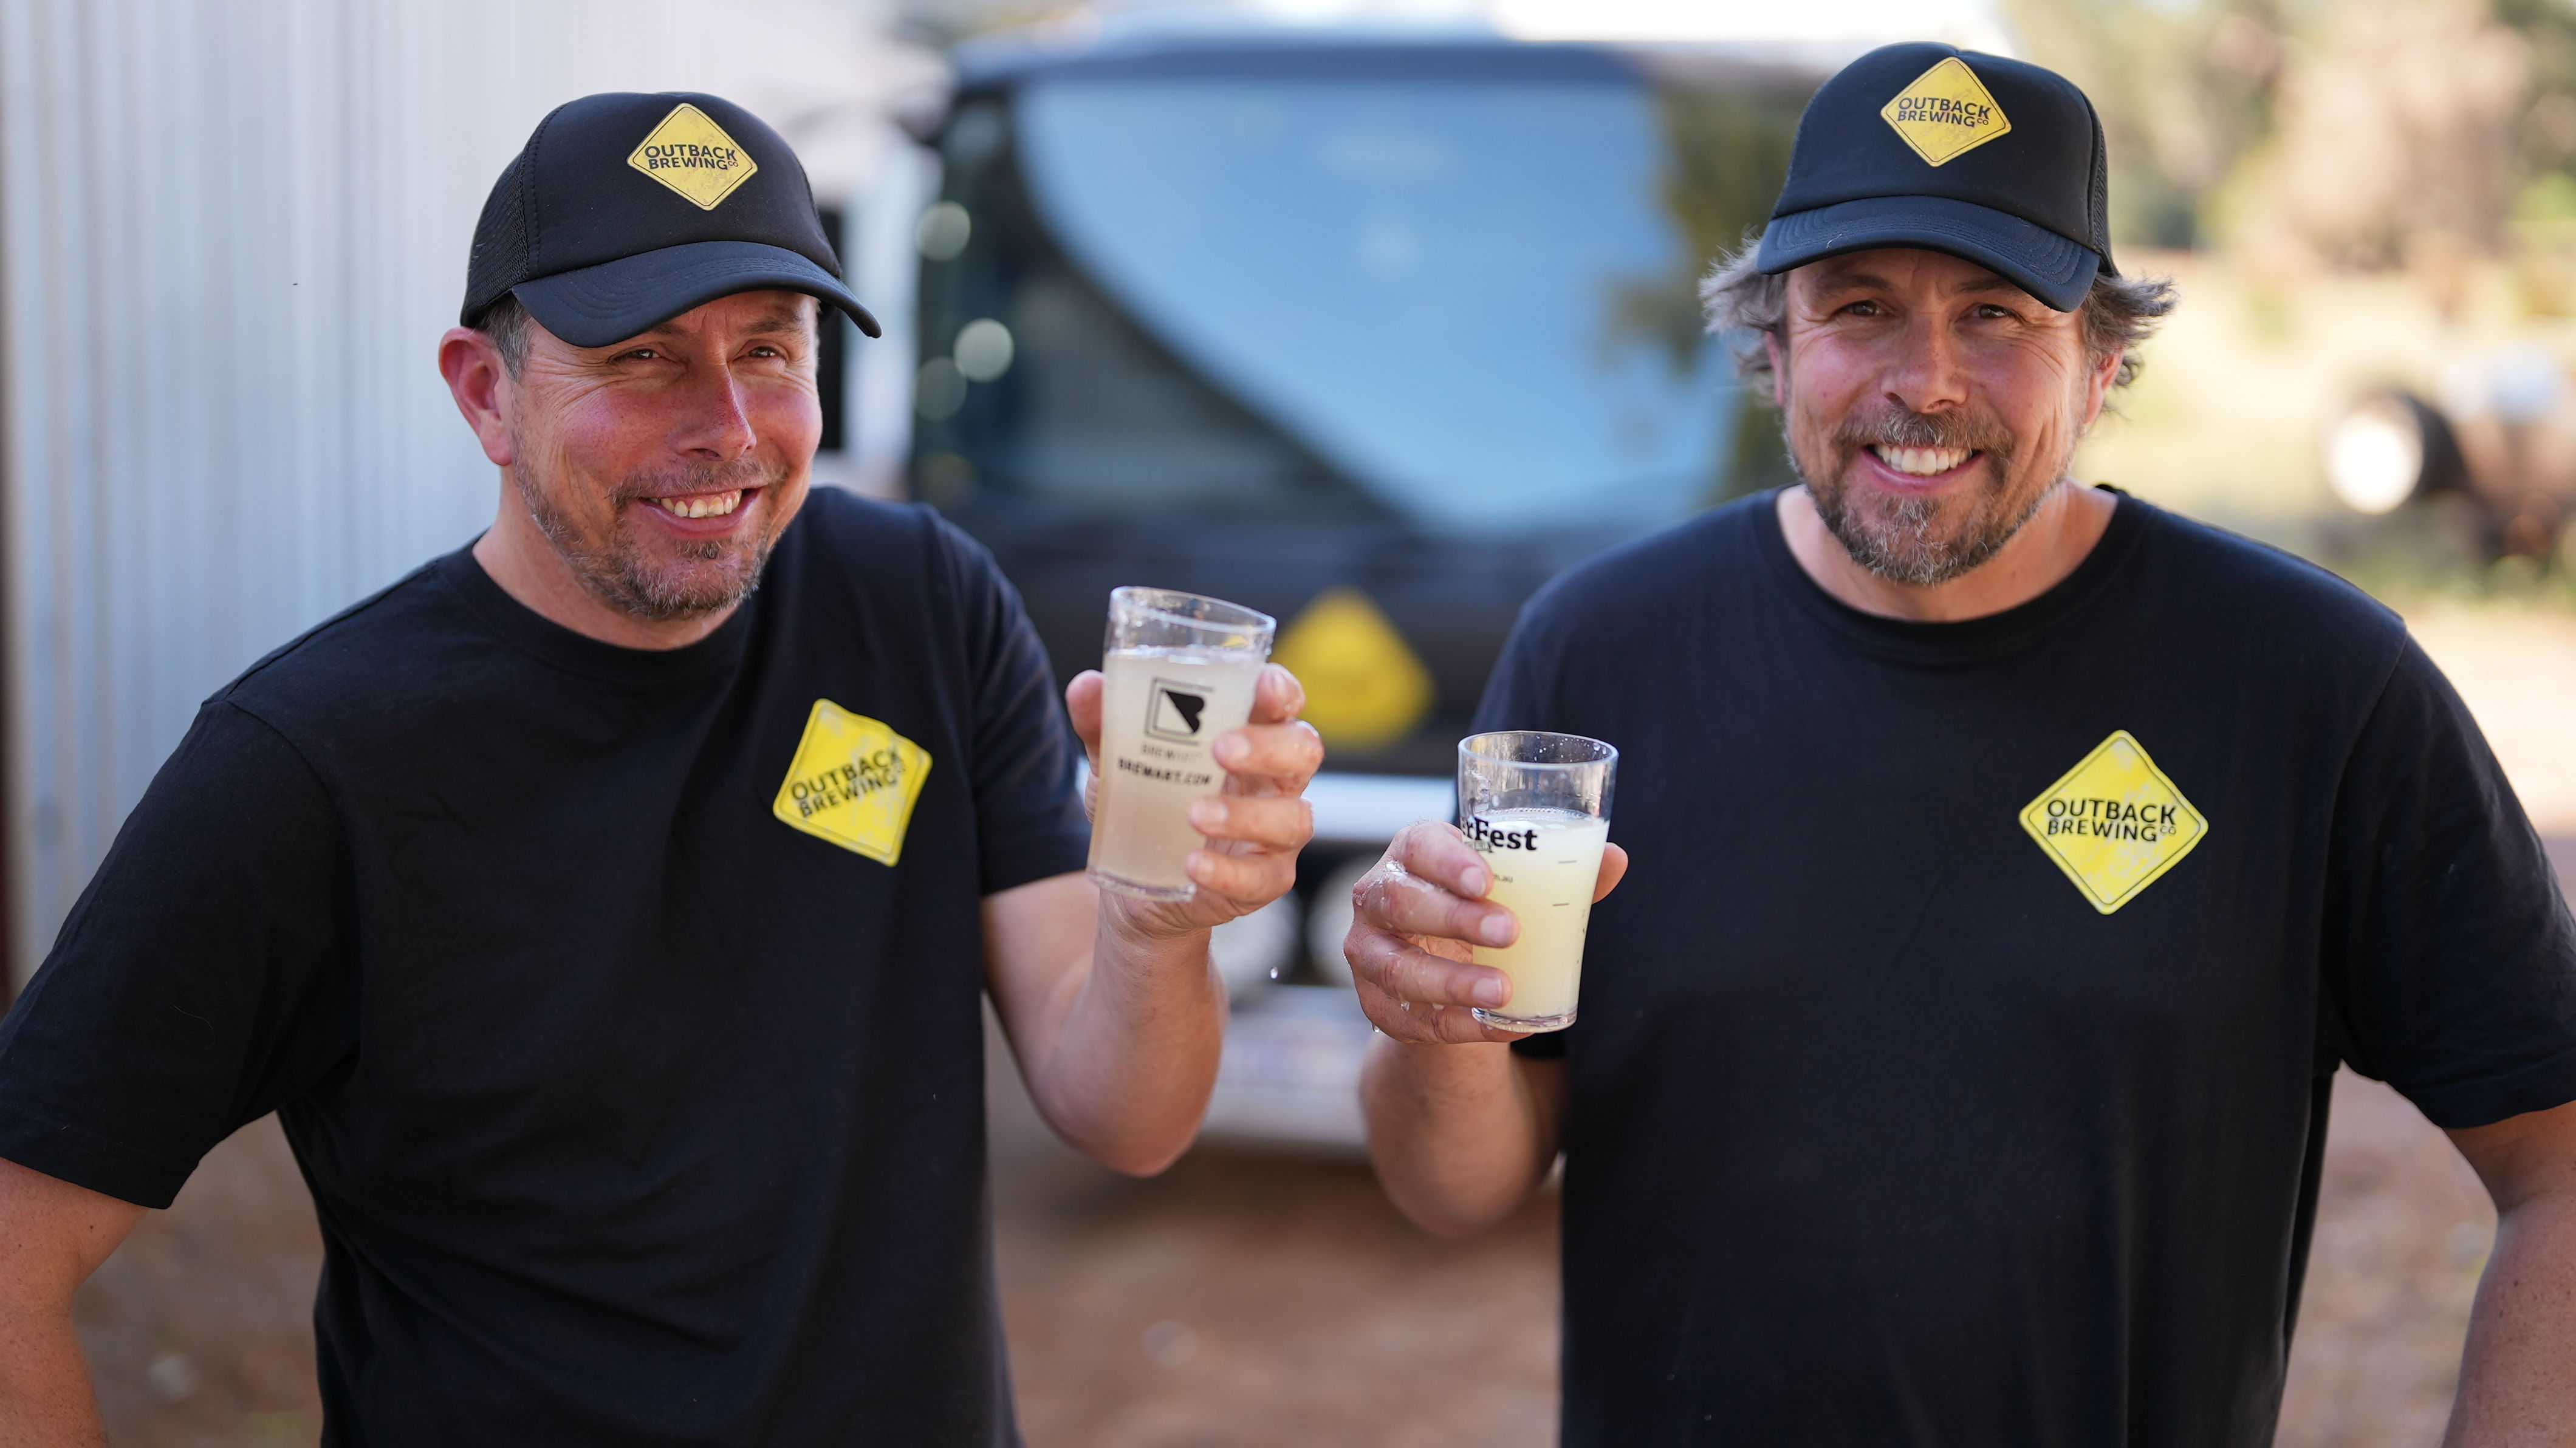 Co-owners of Outback Brewing Co Peter and Adam Watts